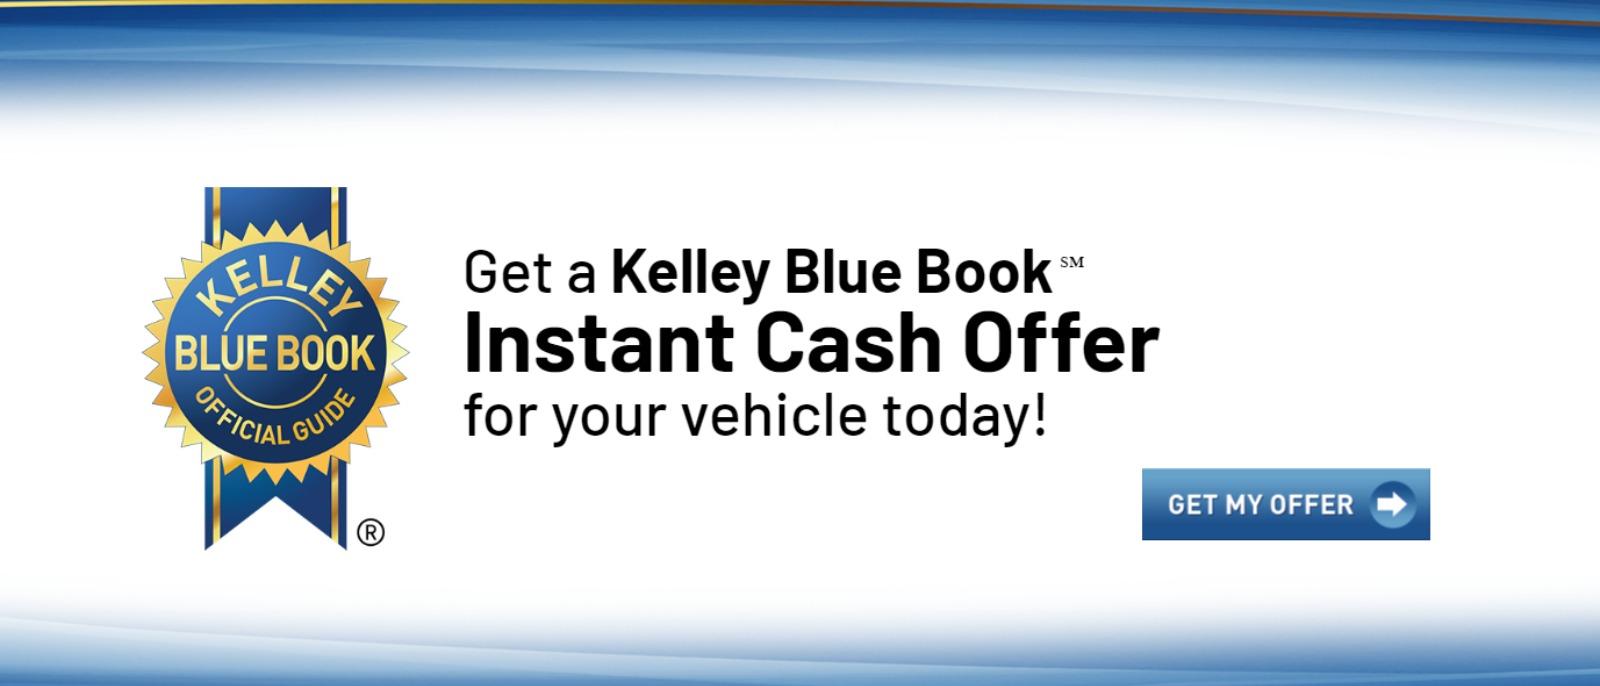 Get a Kelley Blue Books Instant Cash Offer for your vehicle today!